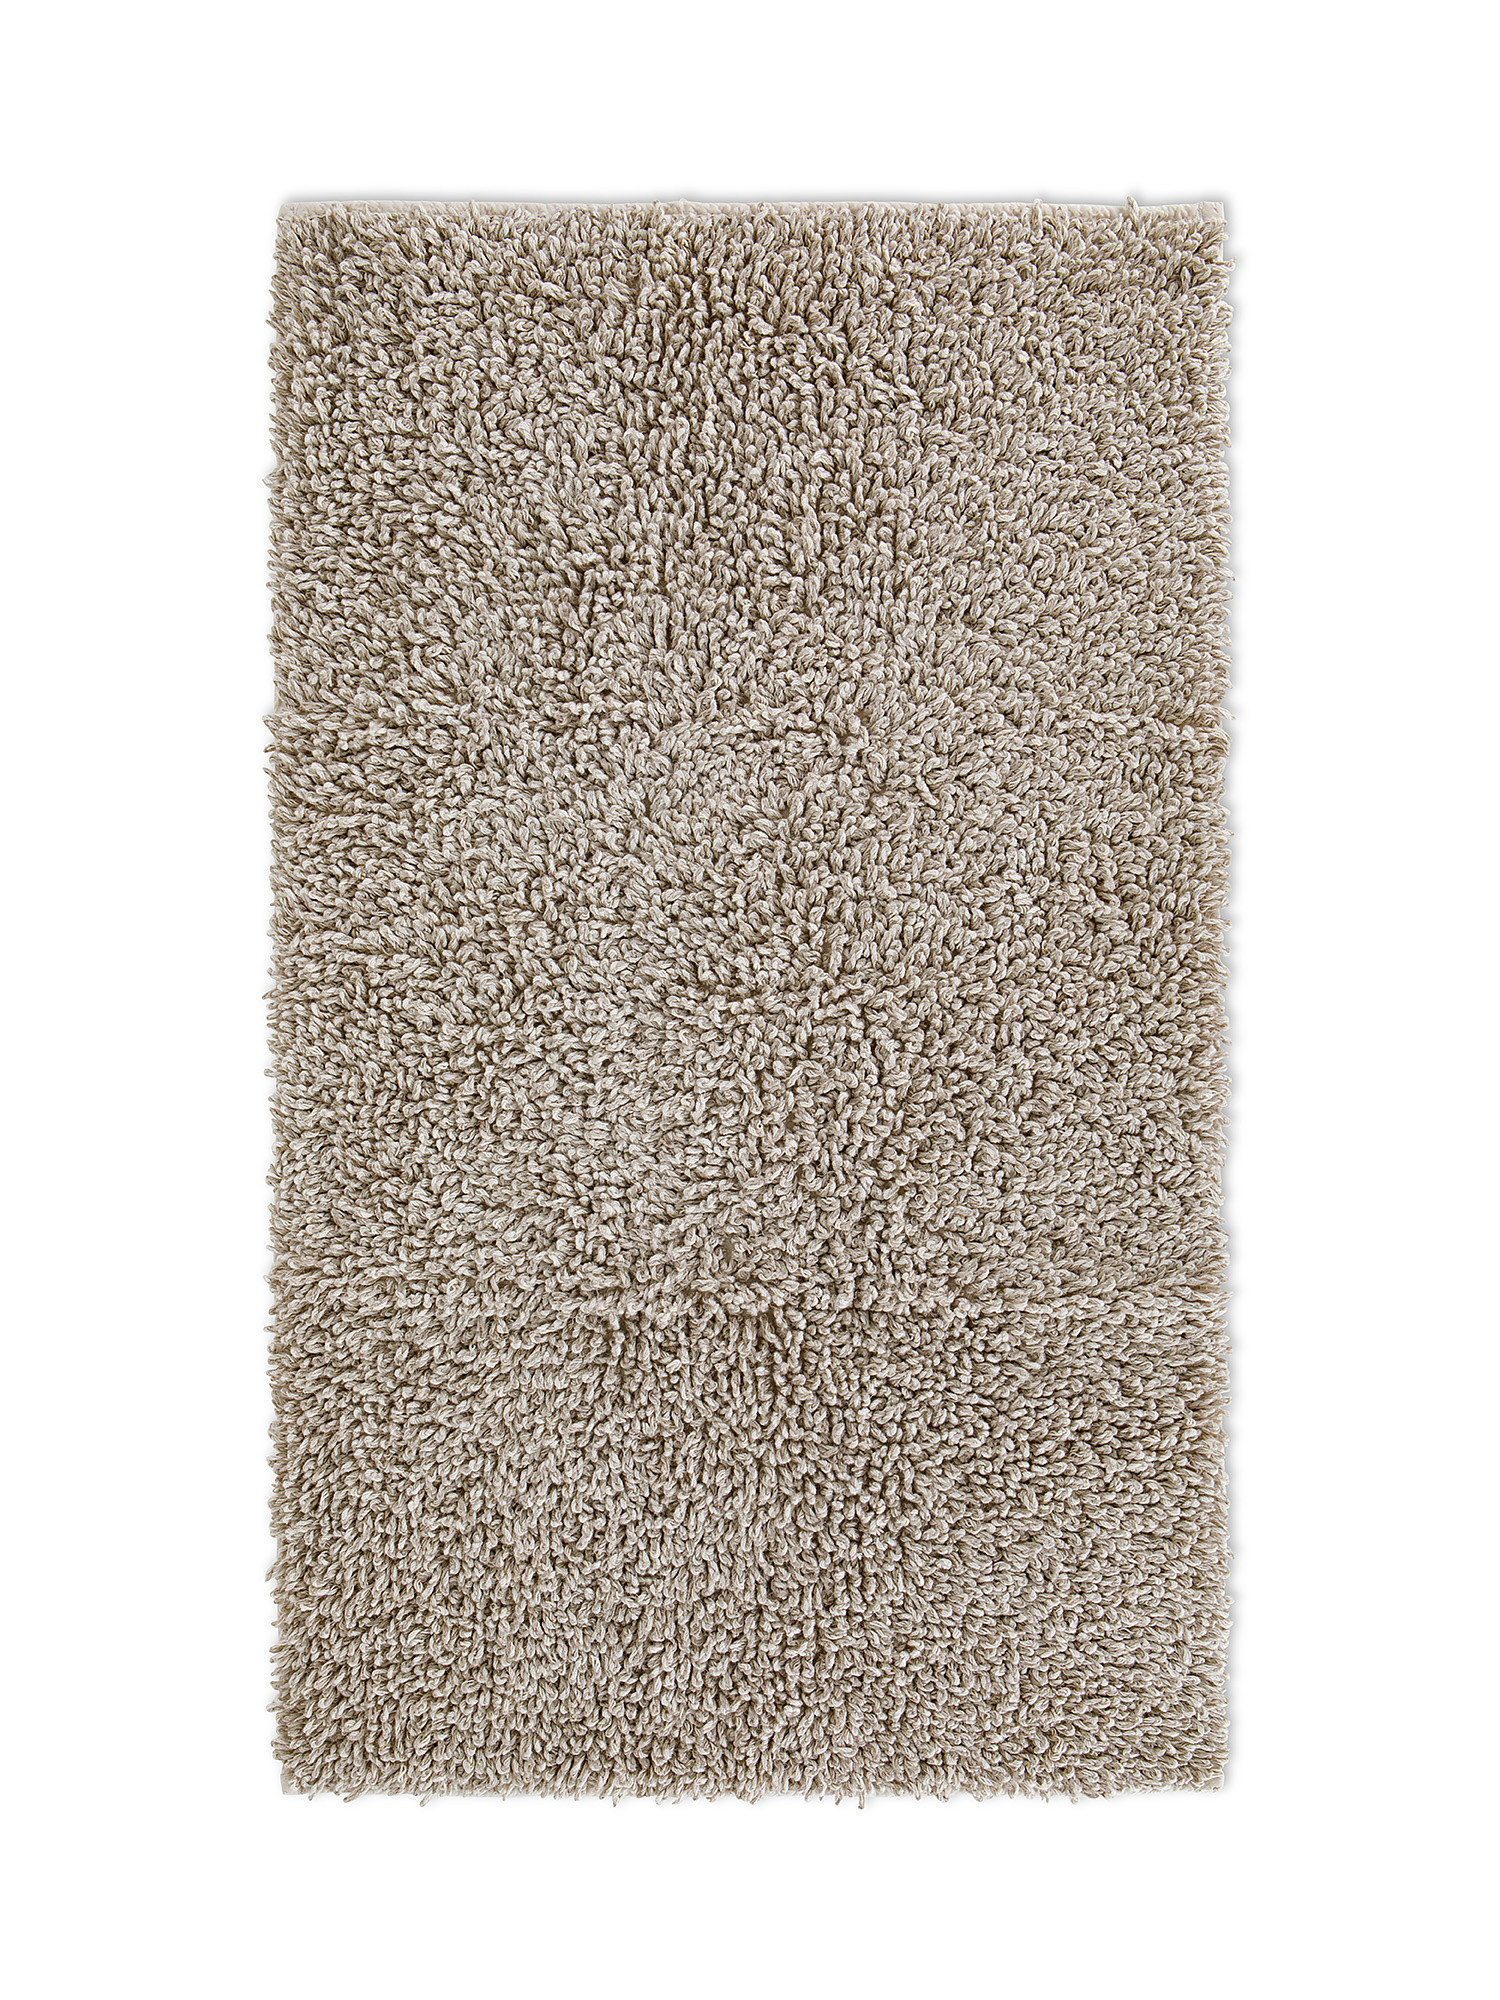 Tappeto bagno misto lino Thermae, Beige scuro, large image number 0